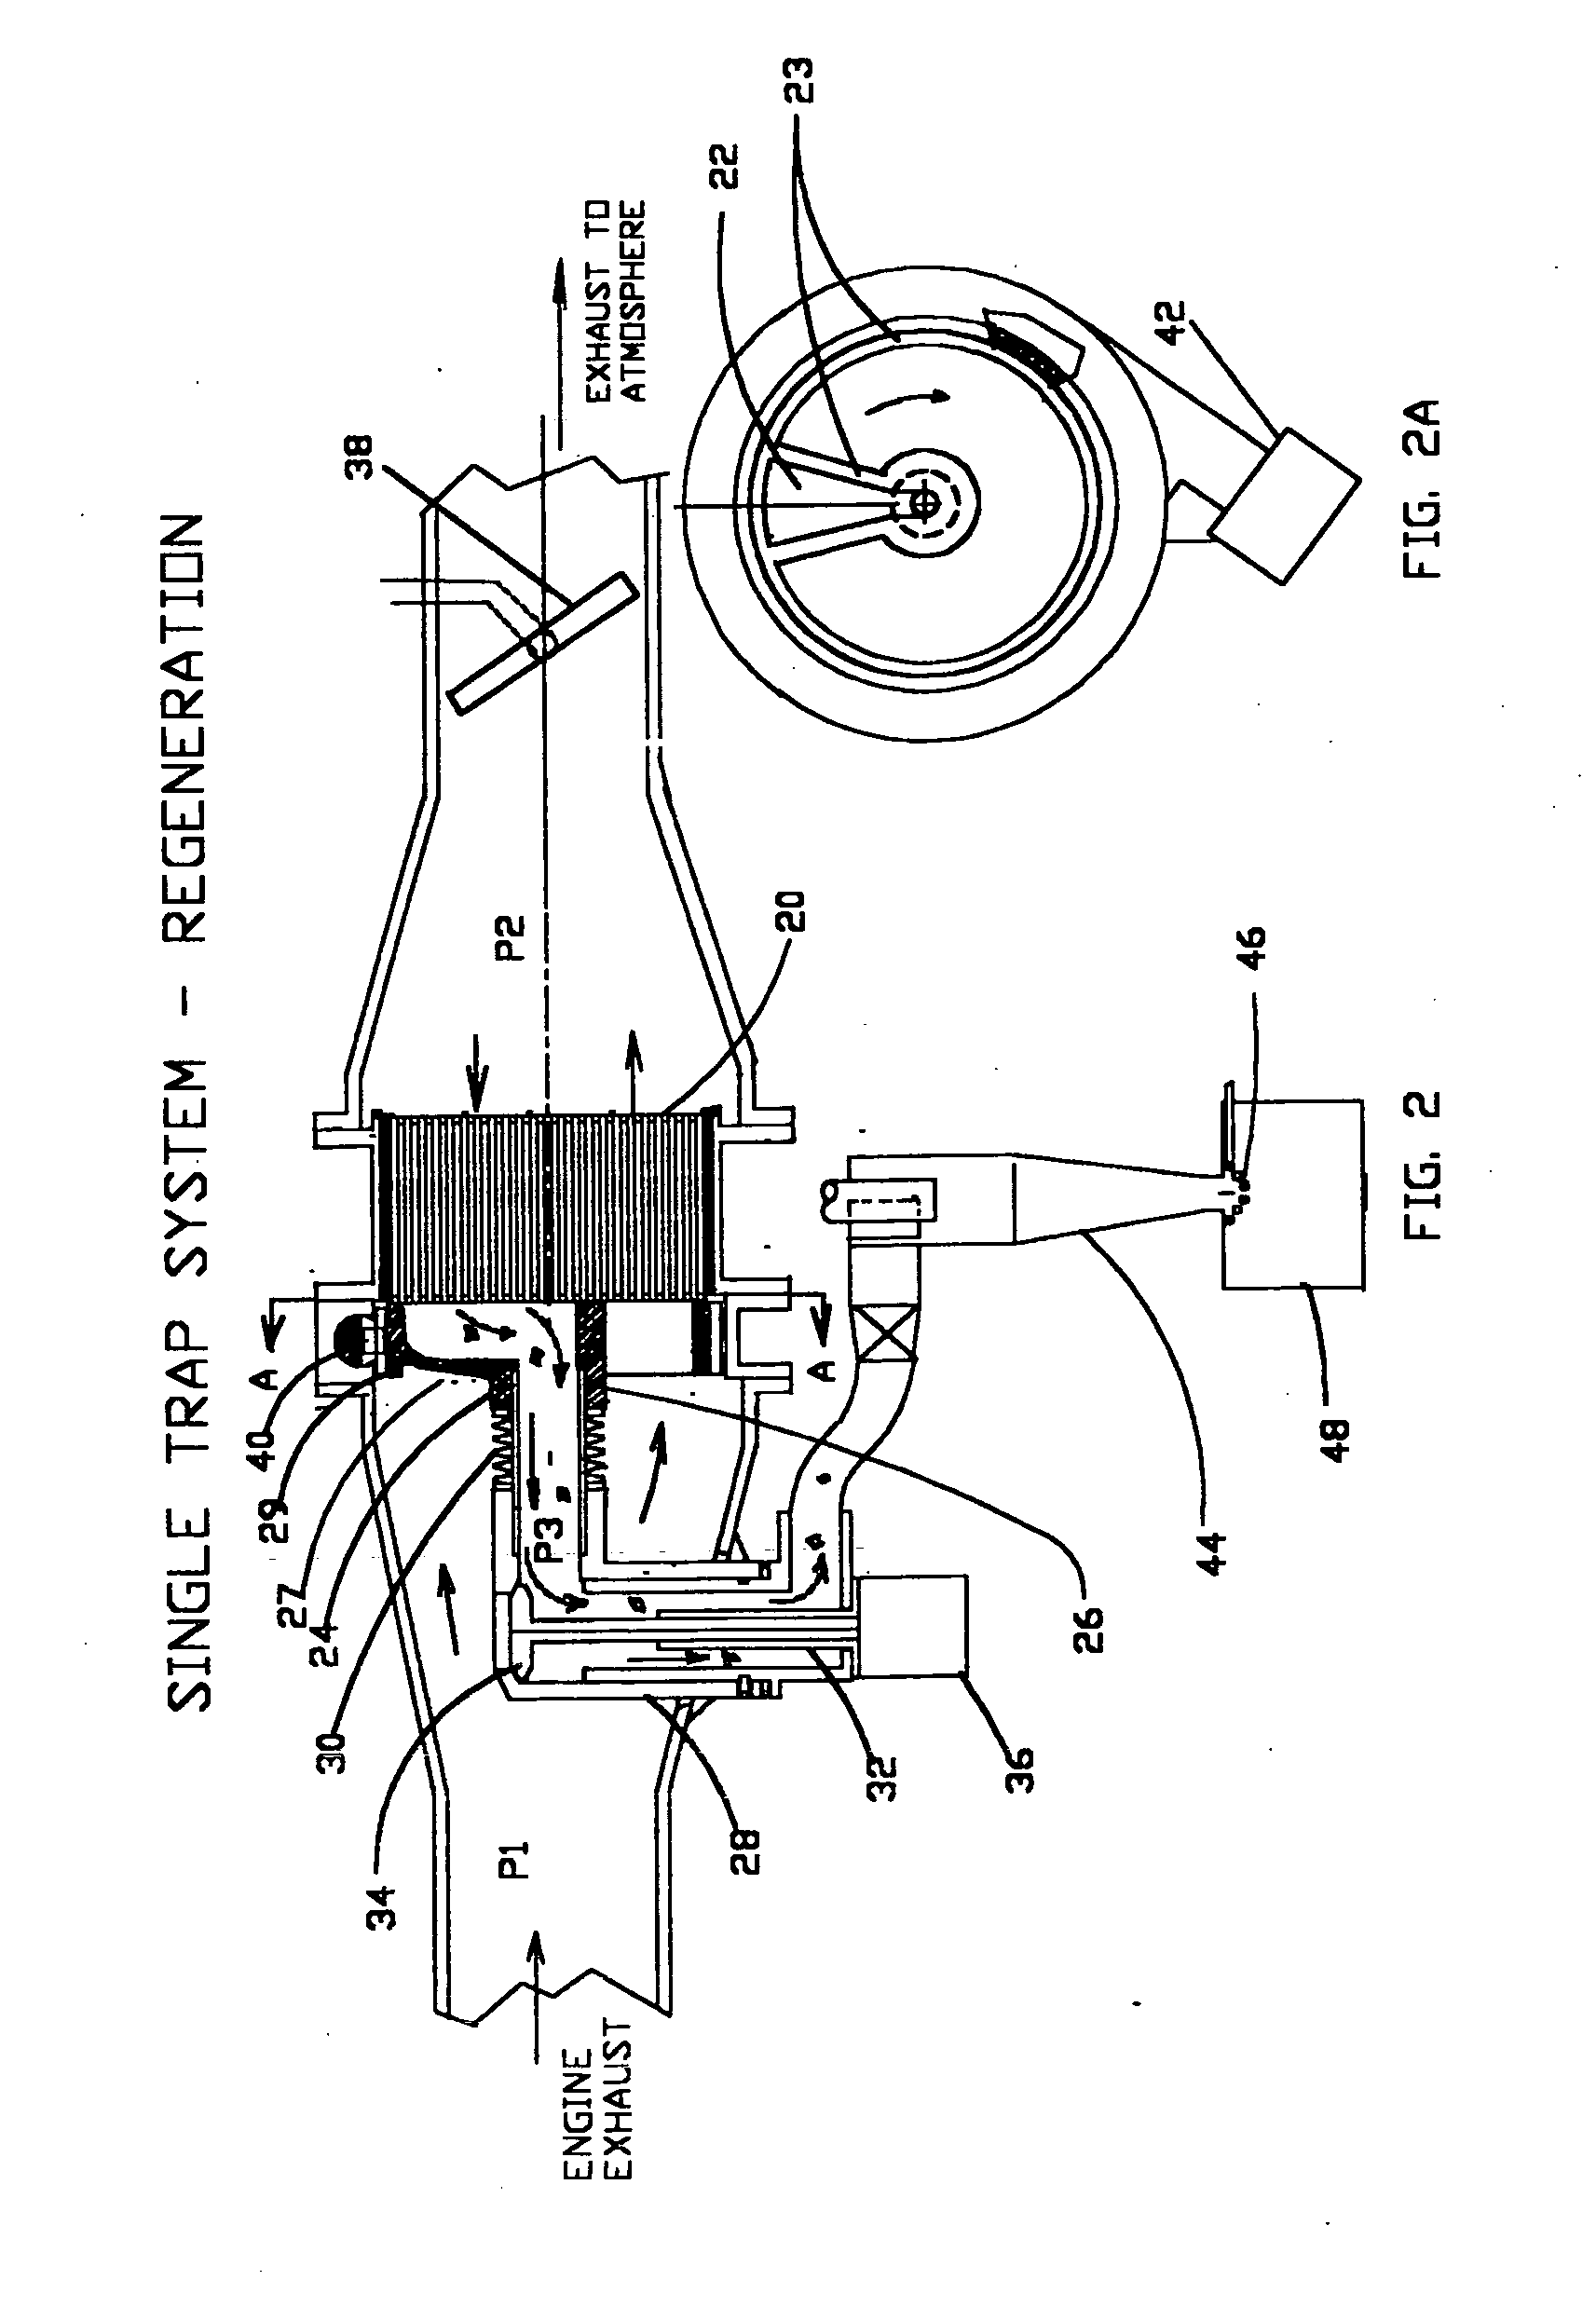 Particulate trap system and method